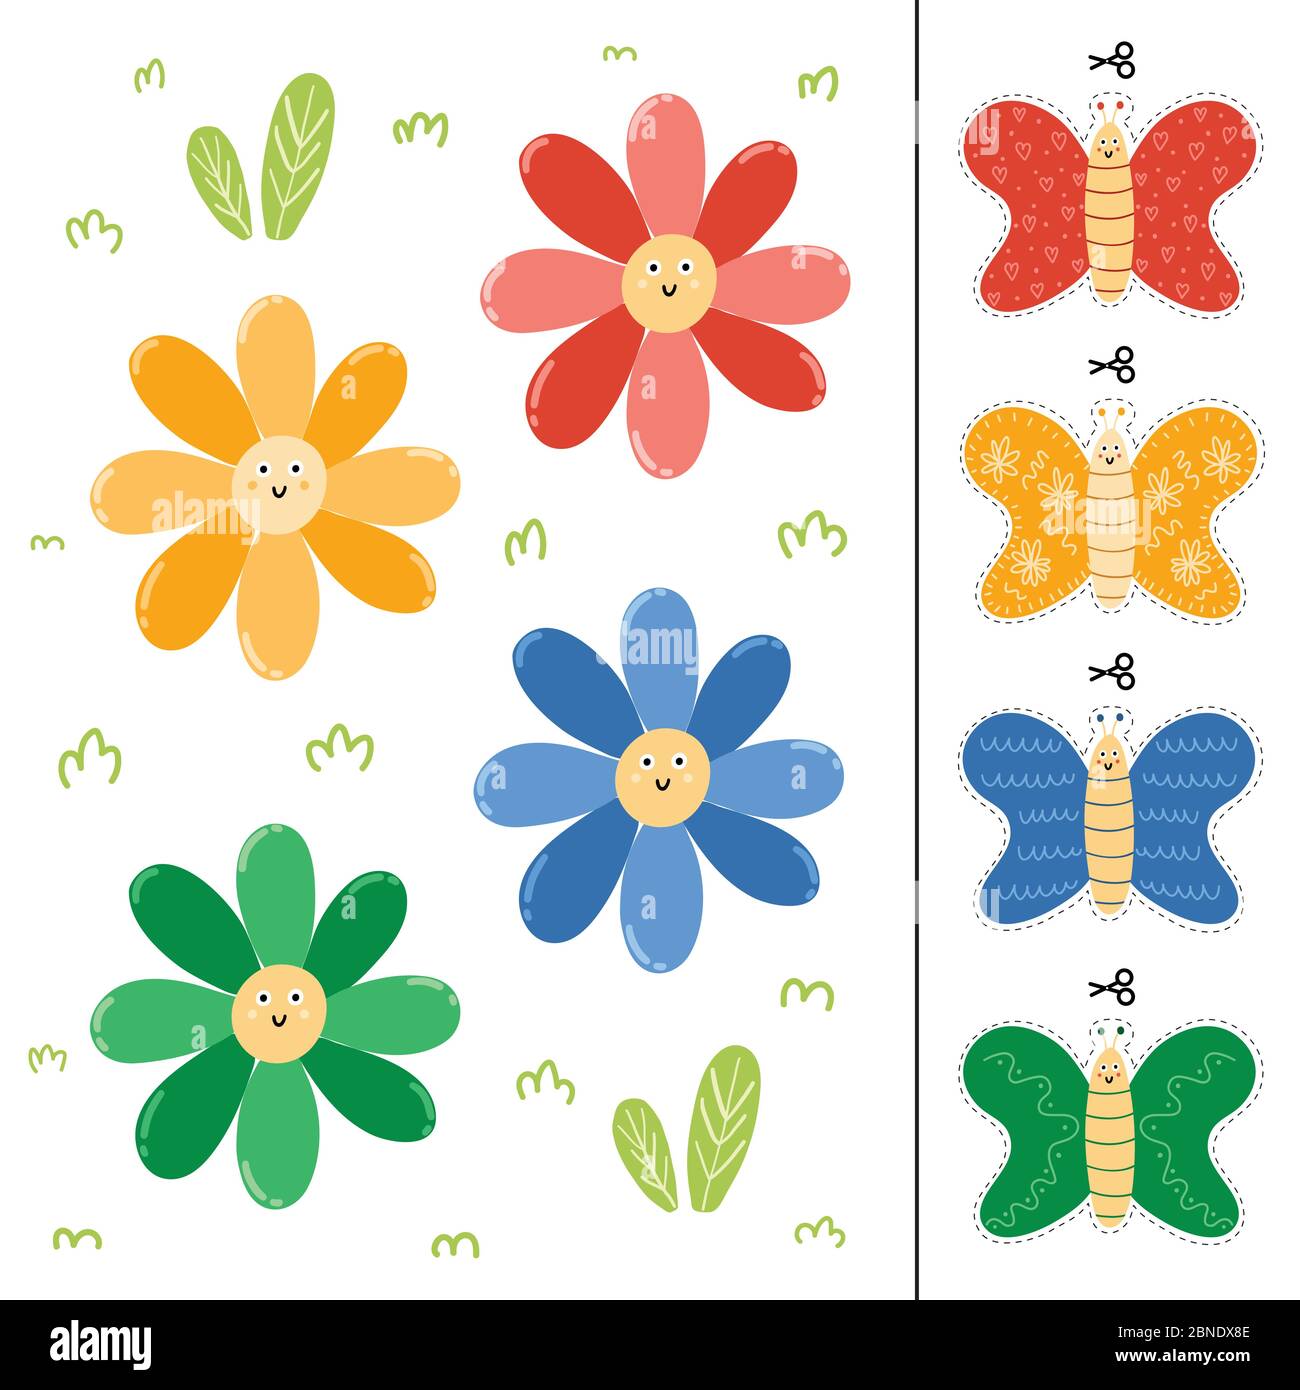 Flowers and butterflies color matching game for kids Stock Vector